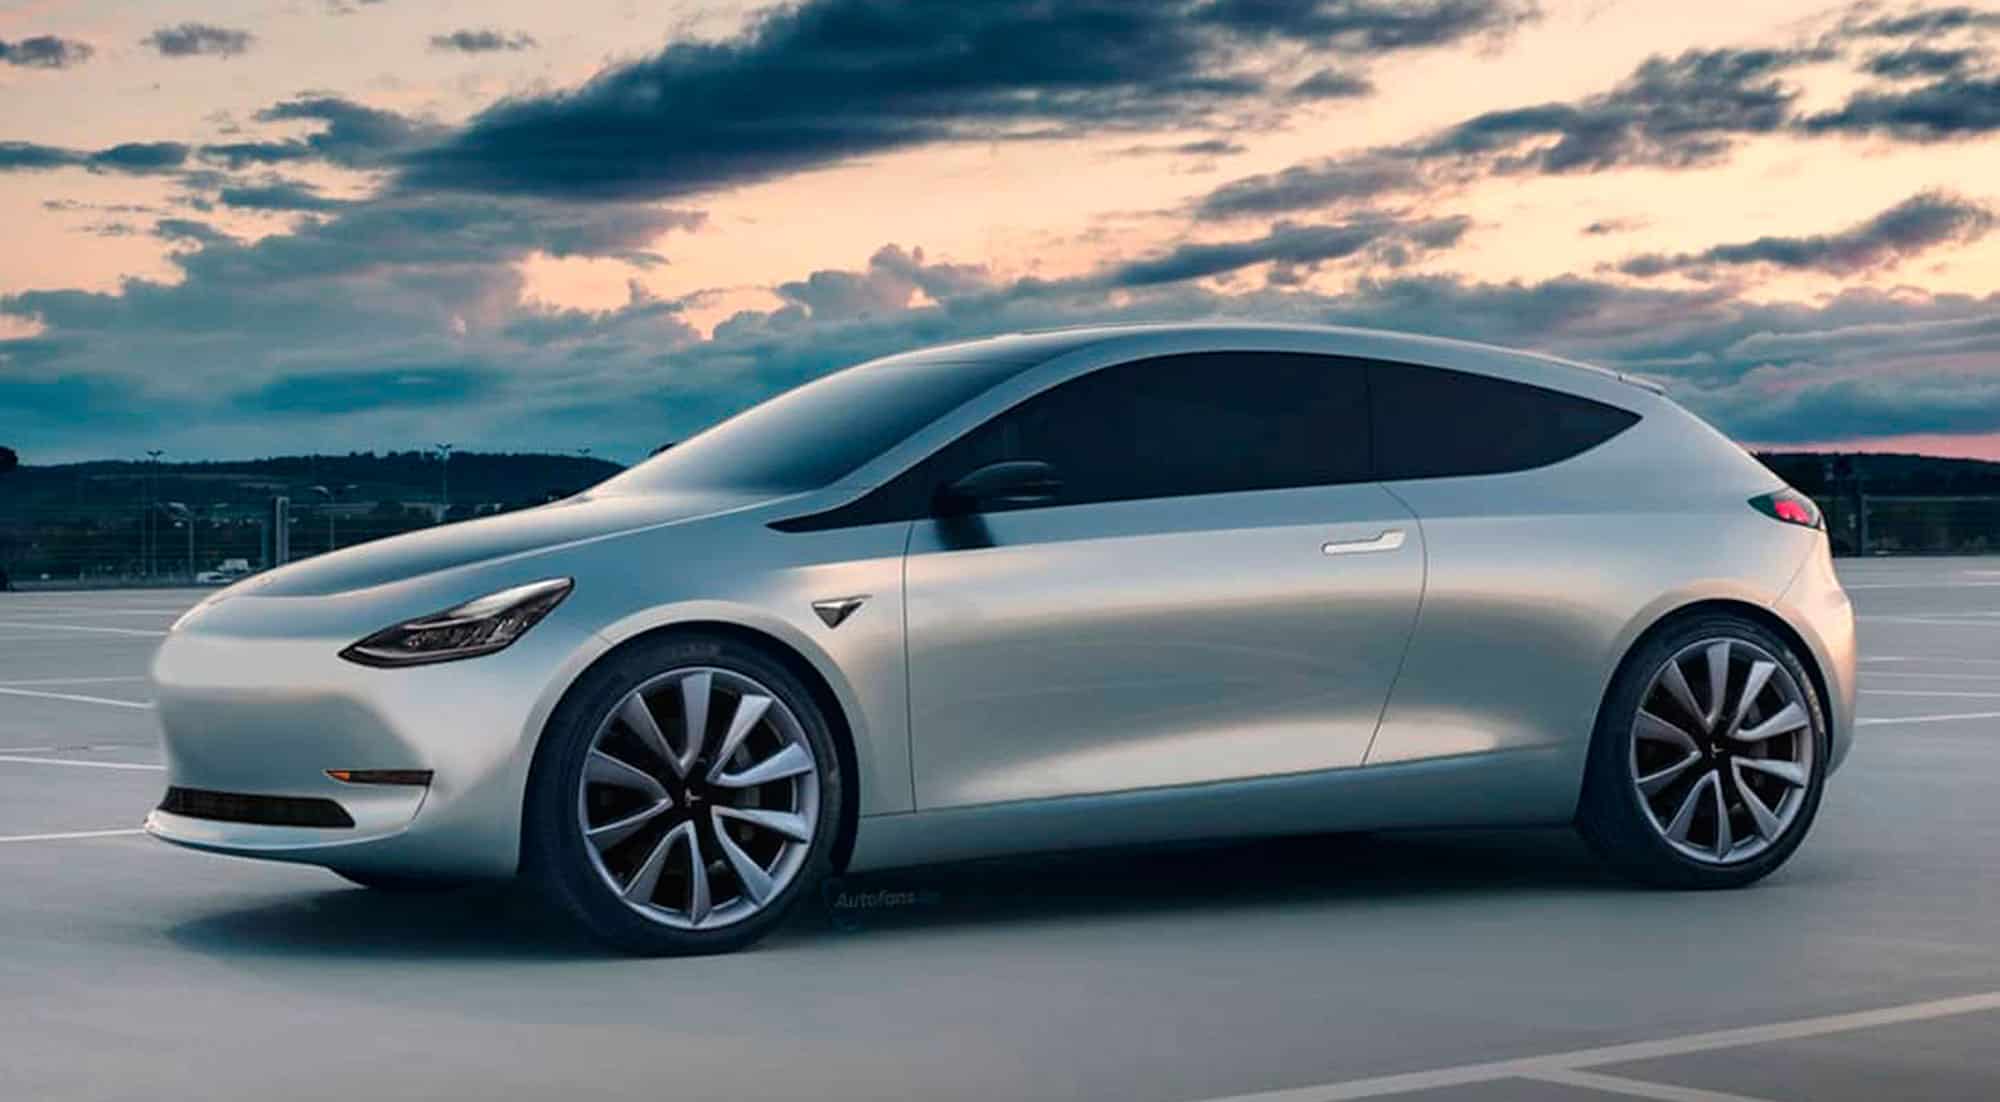 New Tesla Compact EV coming next year: Carwow renders new budget electric  car